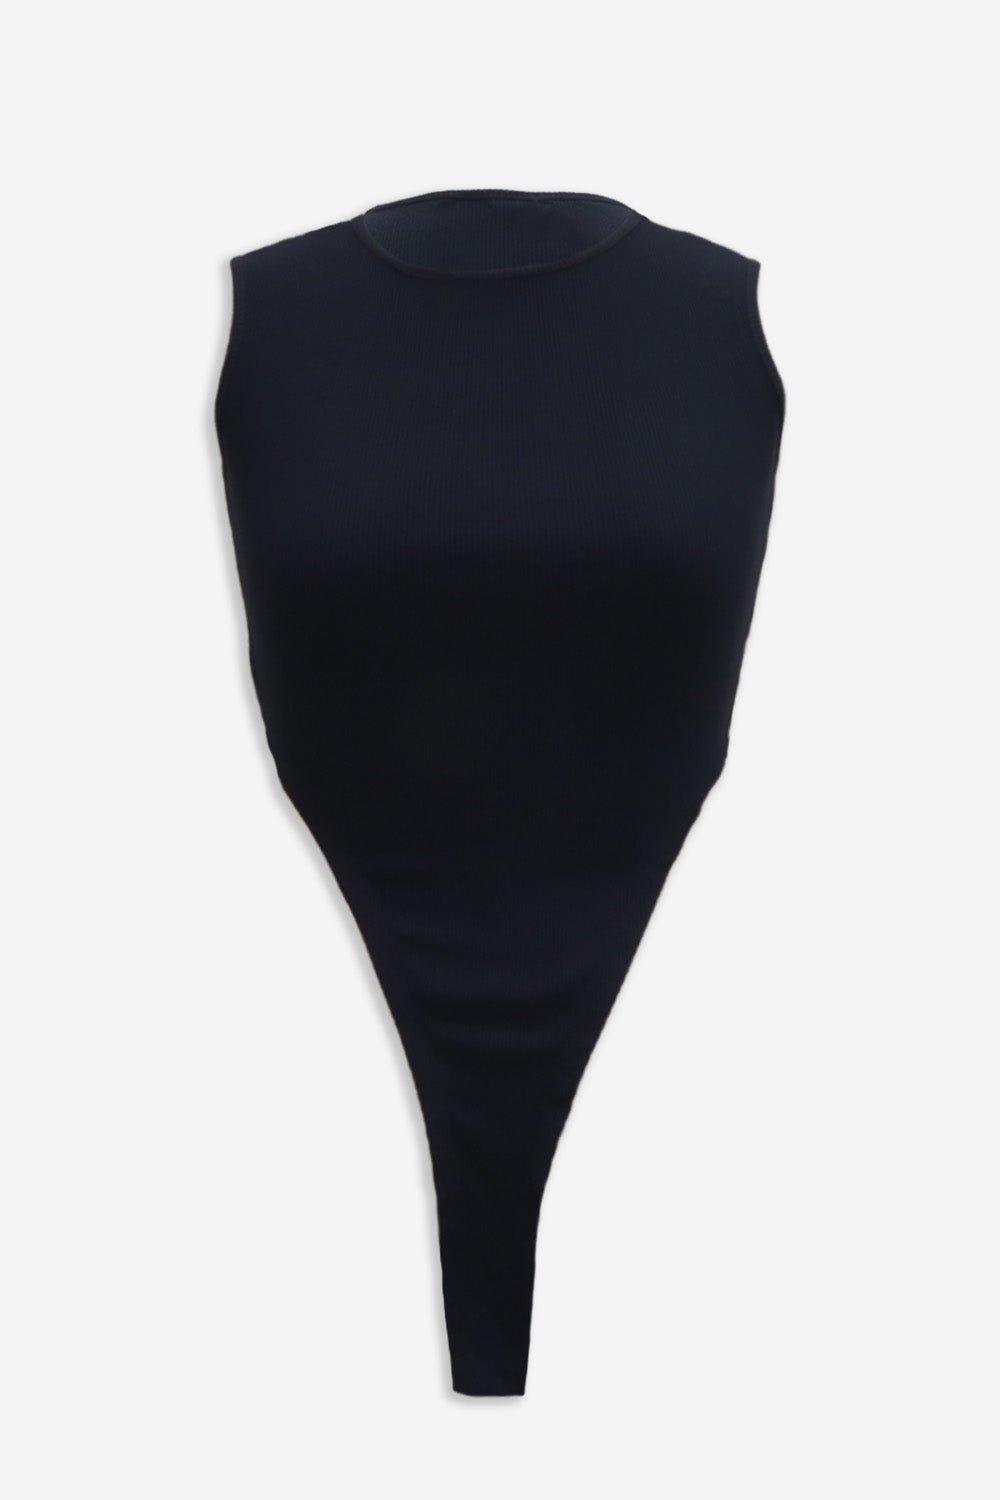 Black Cut Out Body Suit - BEEGLEE